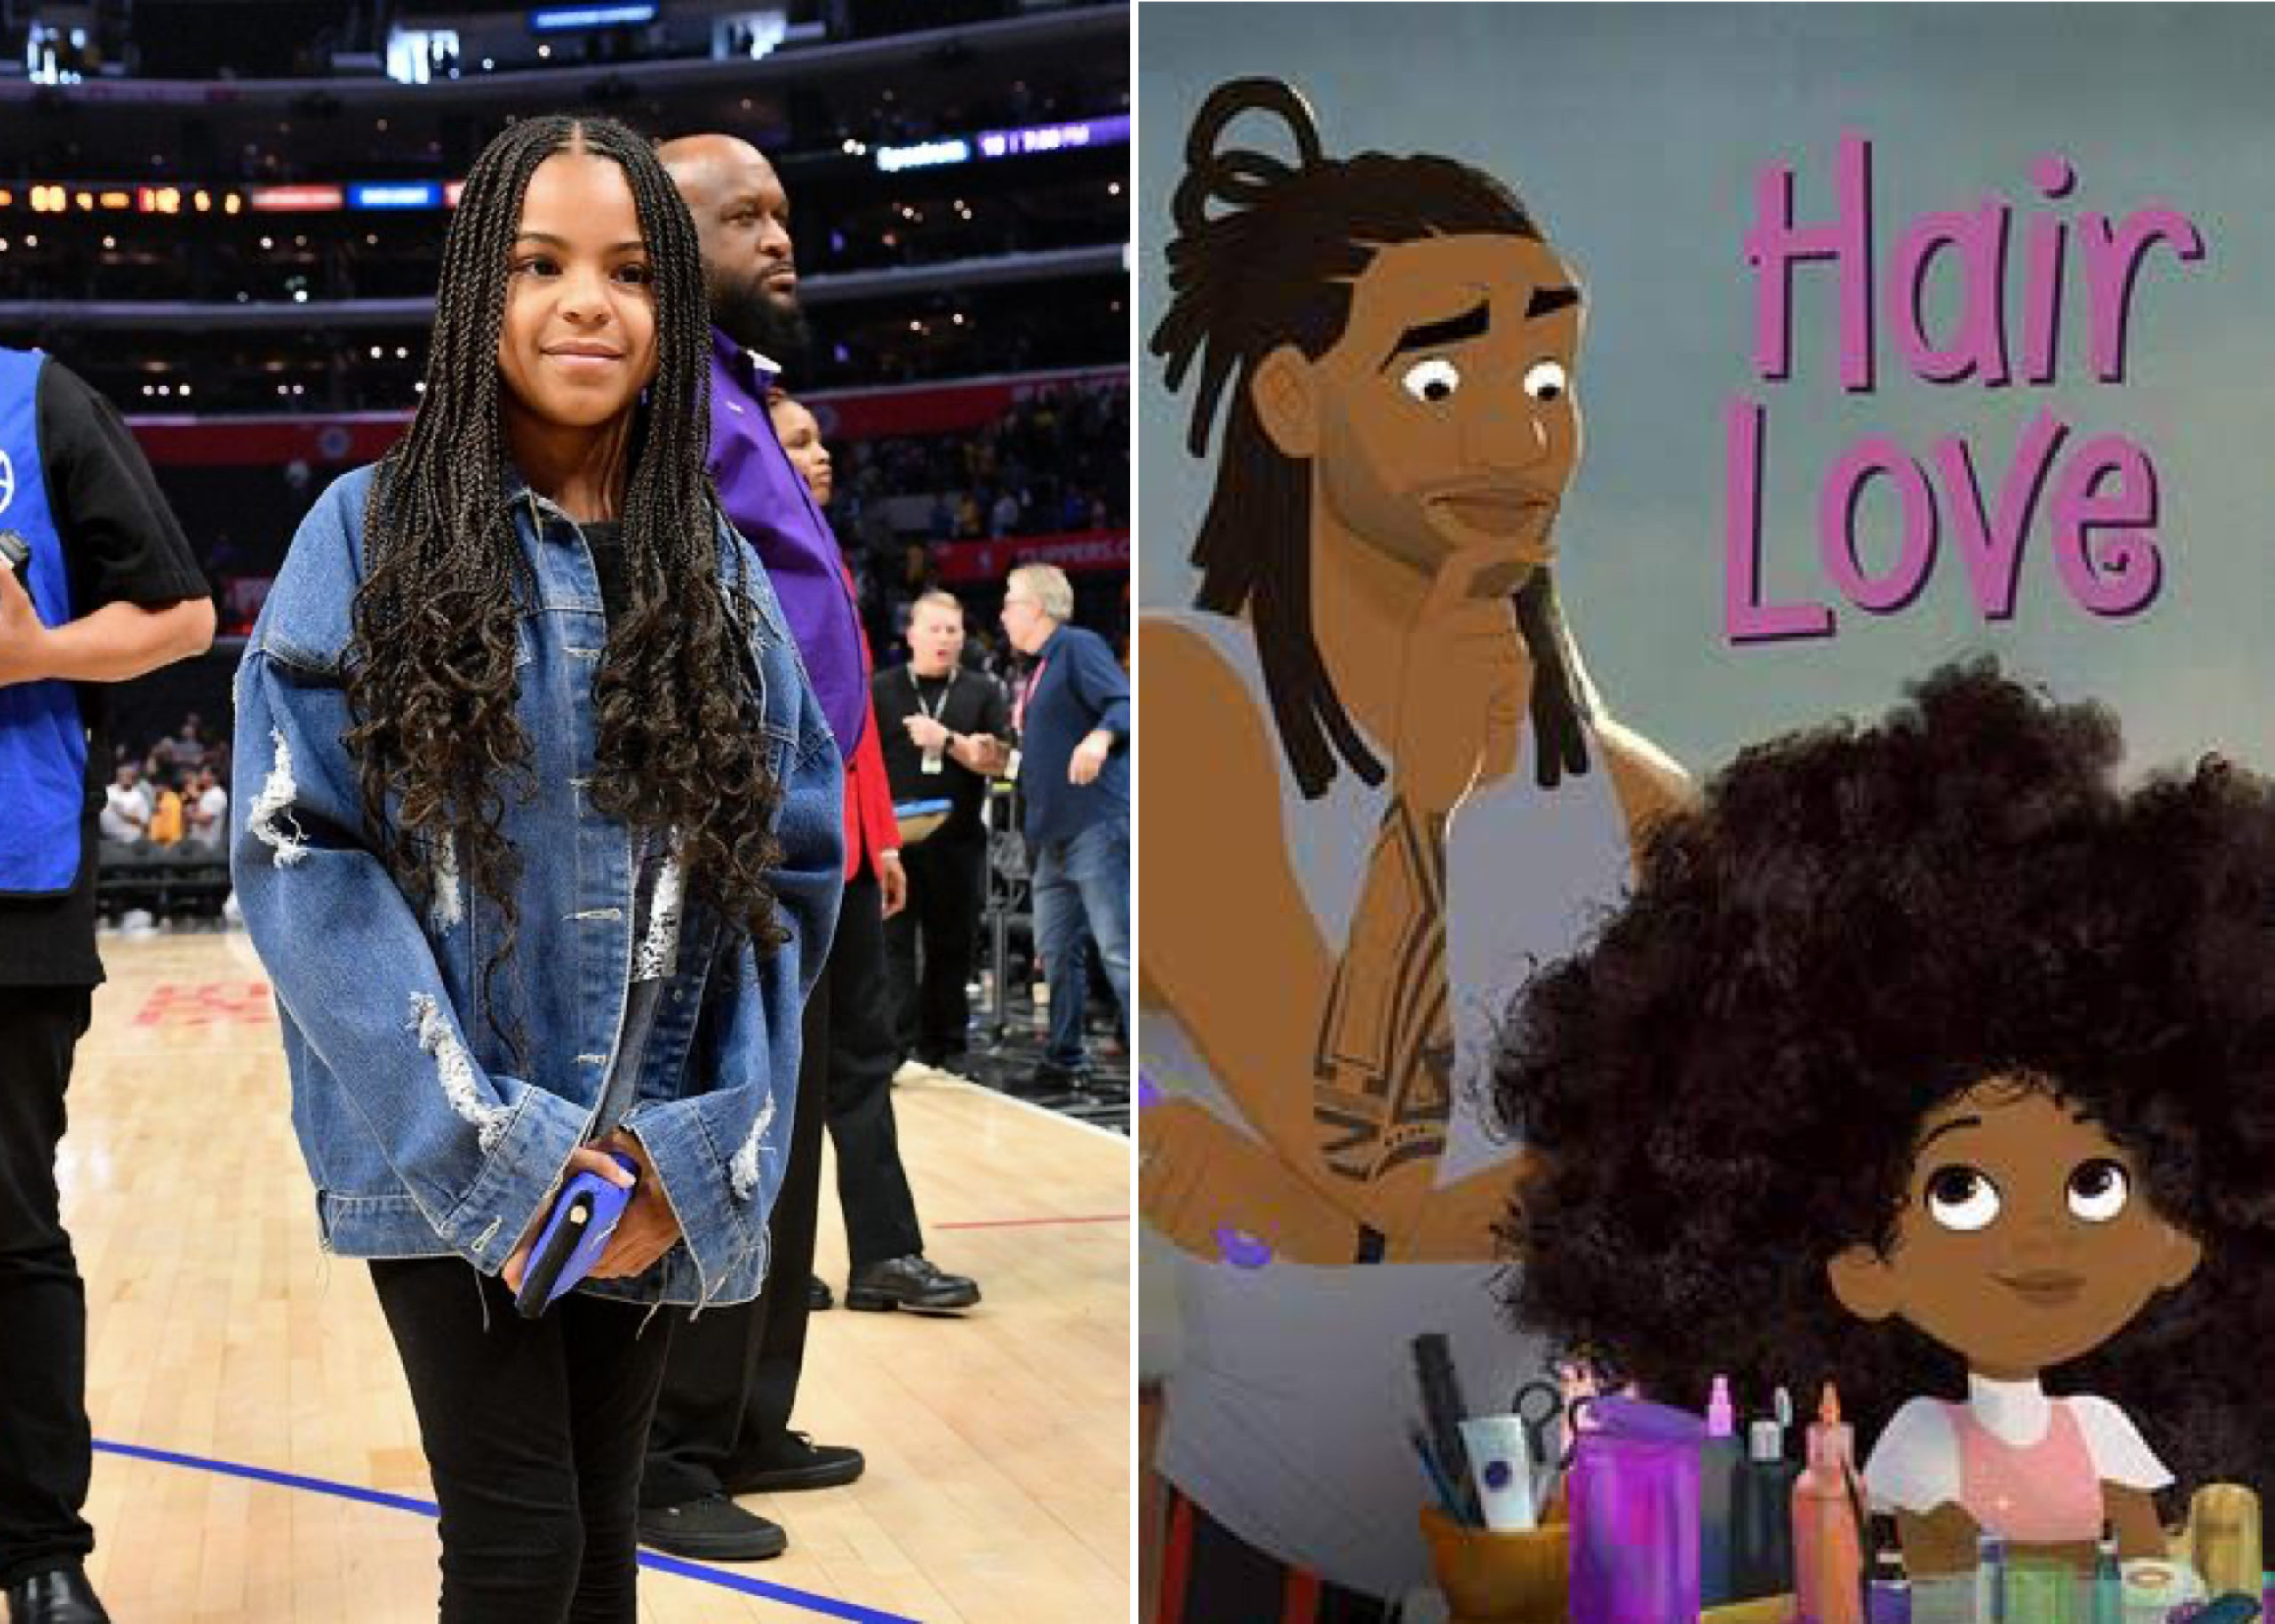 Blue Ivy Carter to Narrate 'Hair Love' Audiobook - wide 5